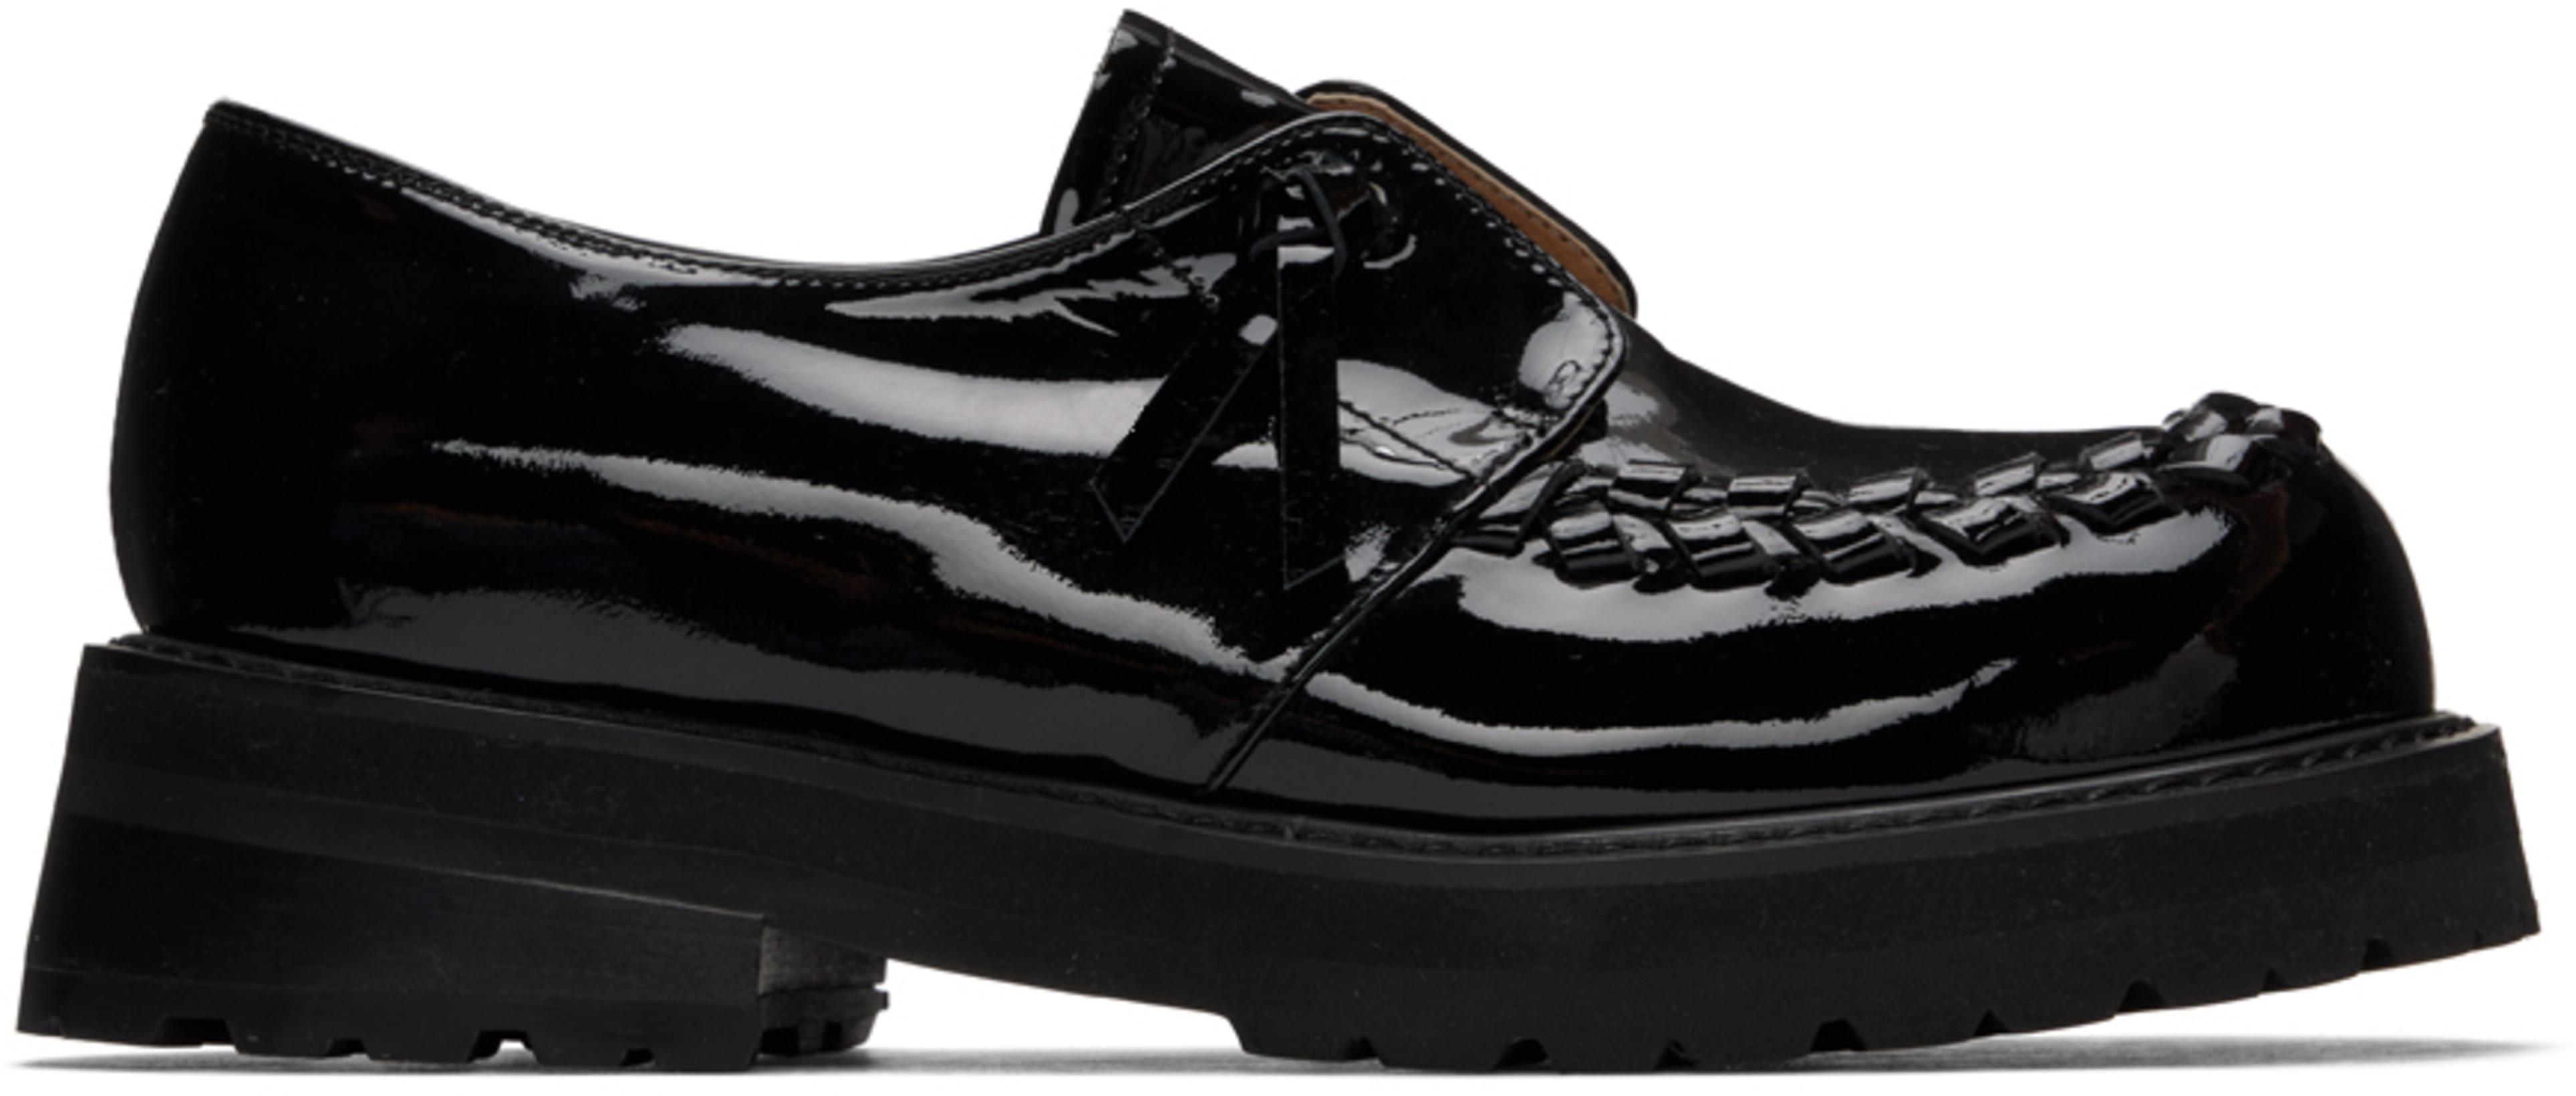 SSENSE Exclusive Black Freed Loafers by COMME SE-A